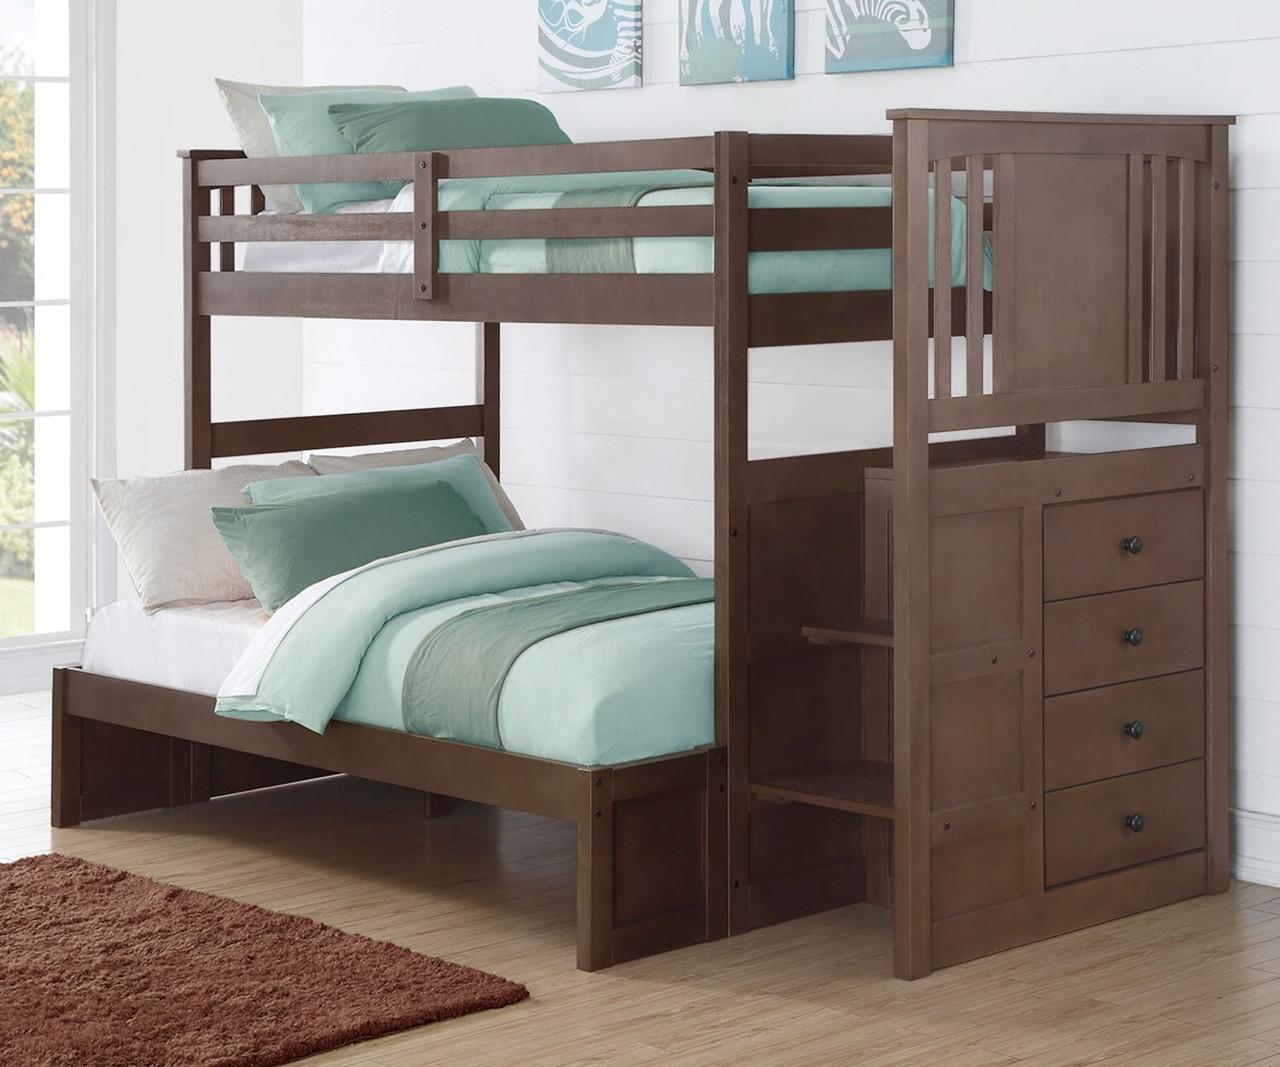 double bed frame for teenager